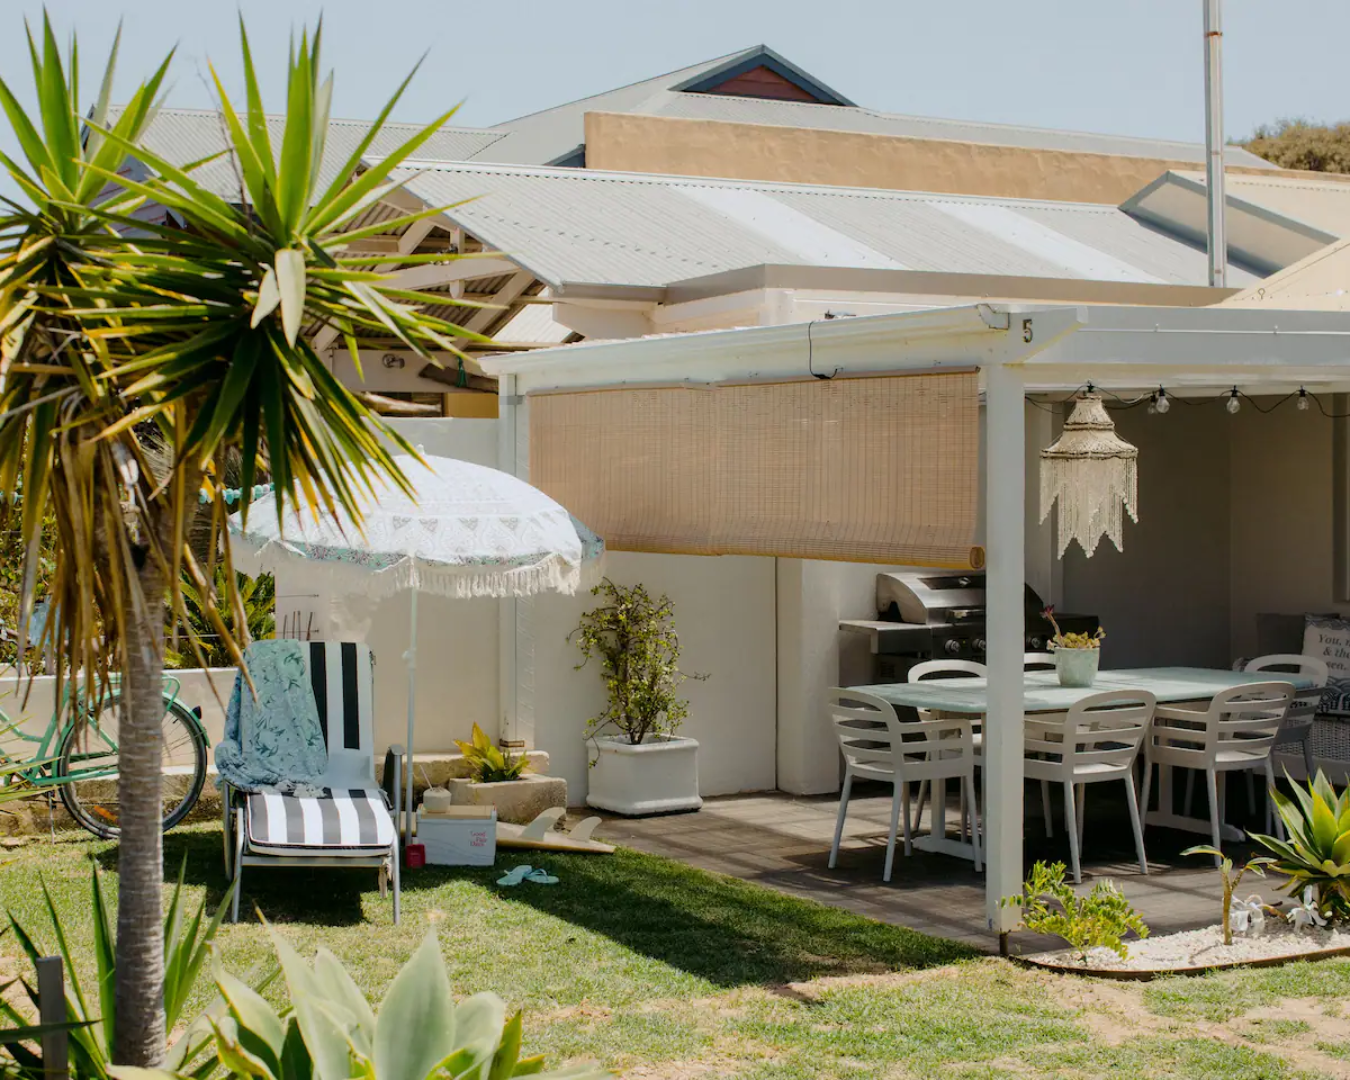 The private courtyard at Yallingup Beach Bungalow.